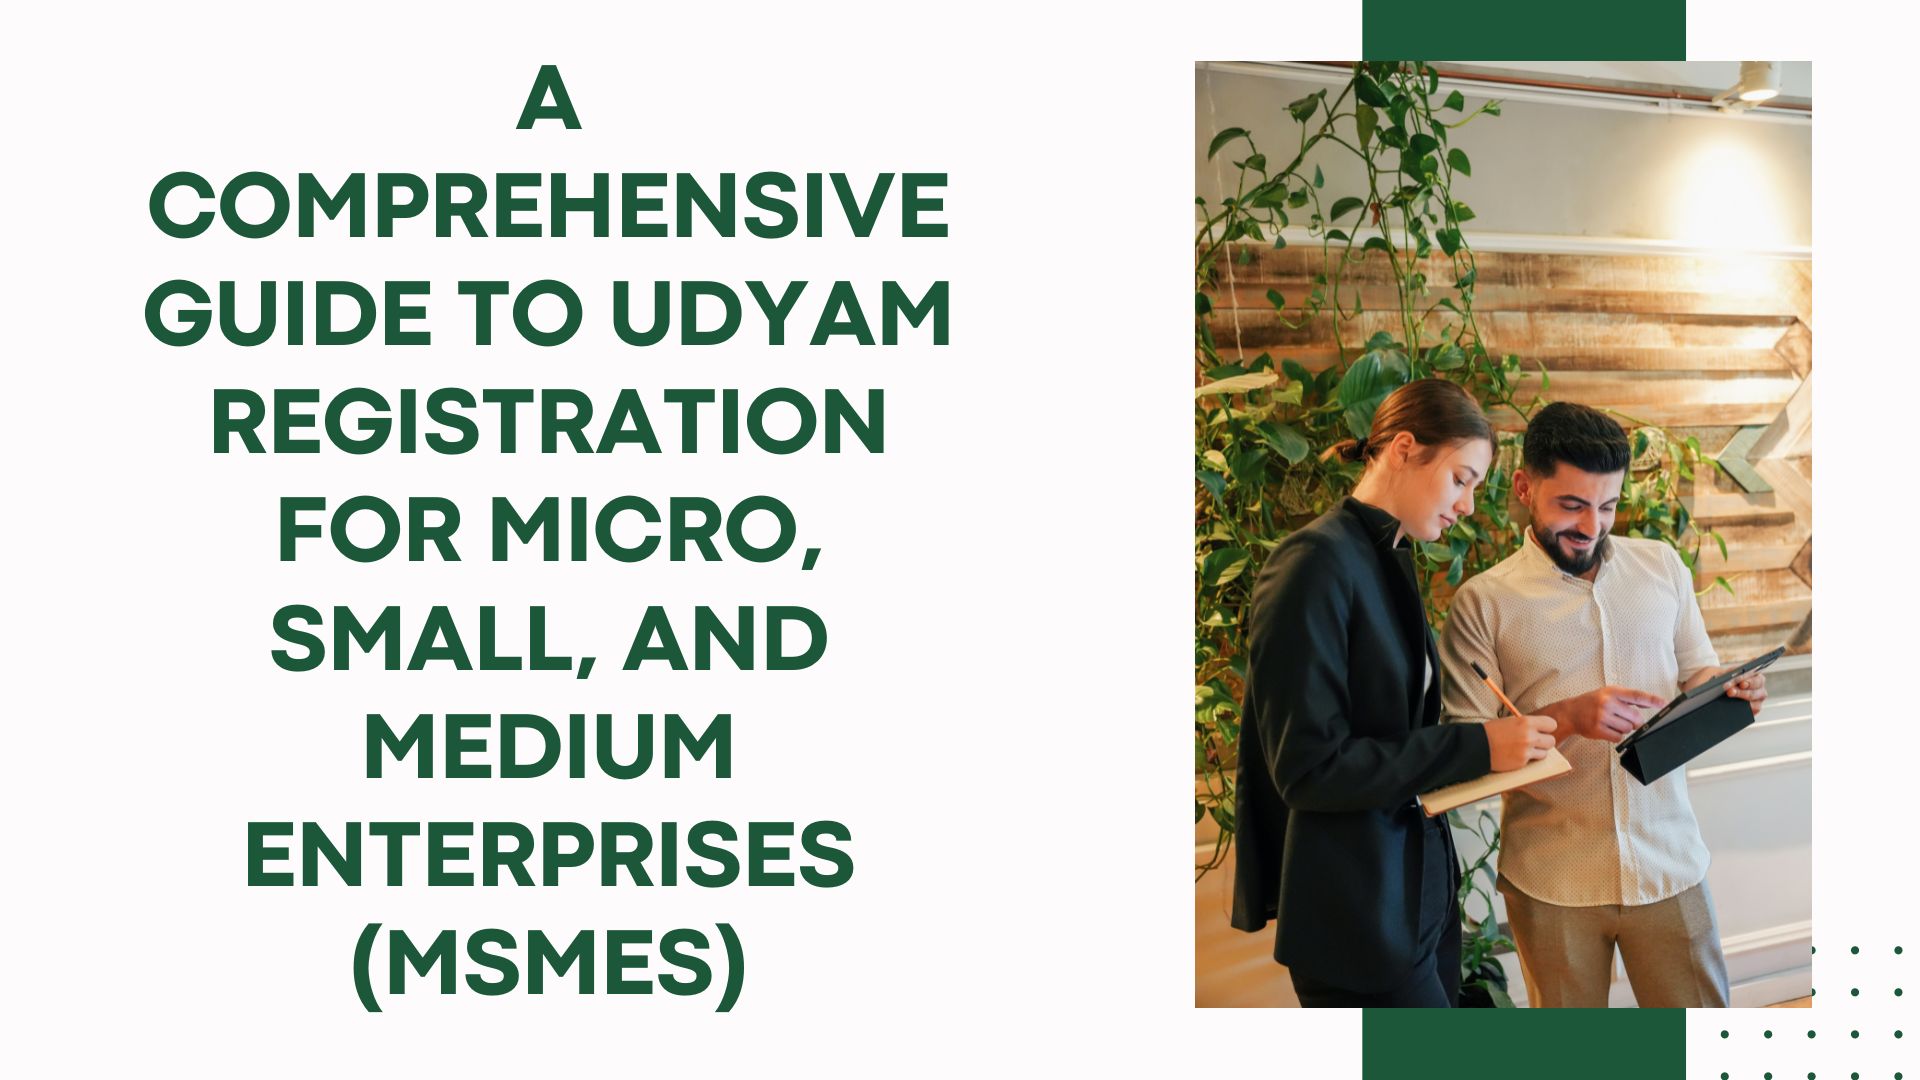 A Comprehensive Guide to Udyam Registration for Micro, Small, and Medium Enterprises (MSMEs)